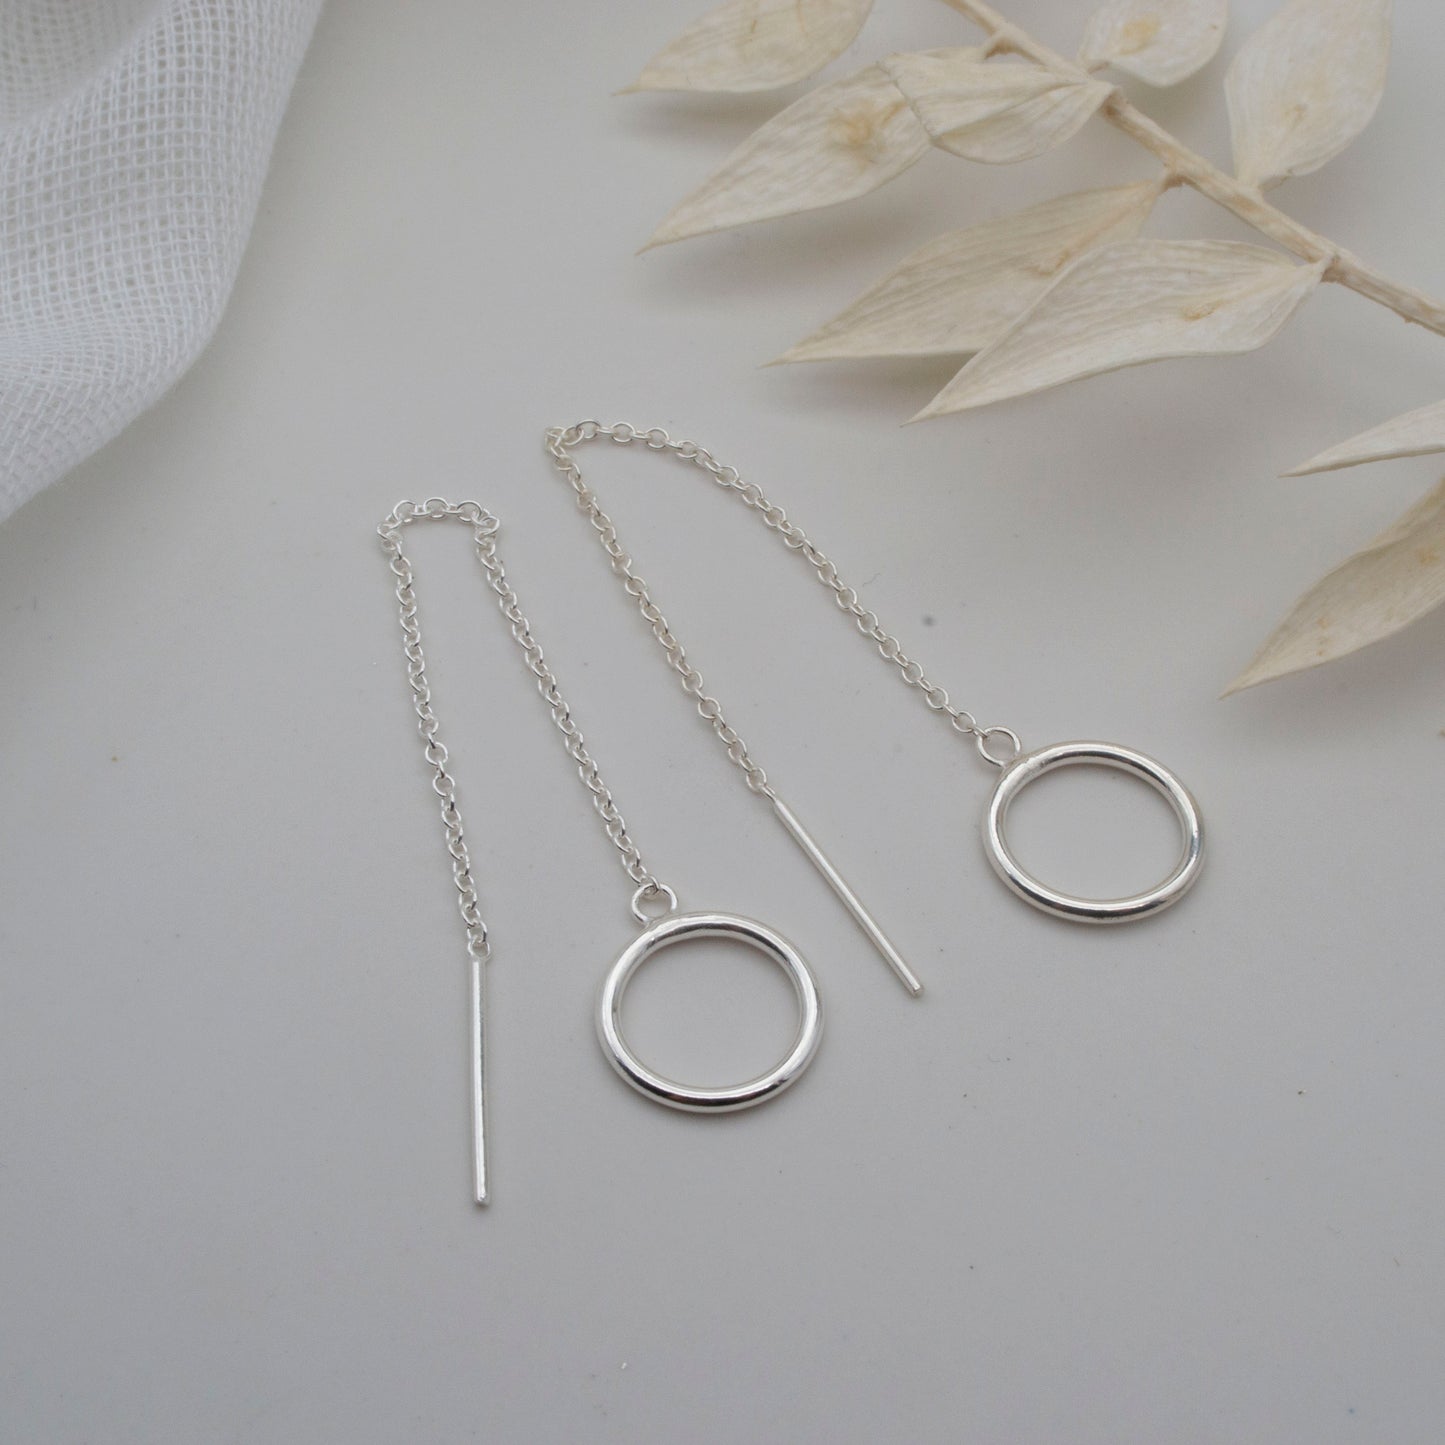 Simplicity circle threader earrings - sterling silver